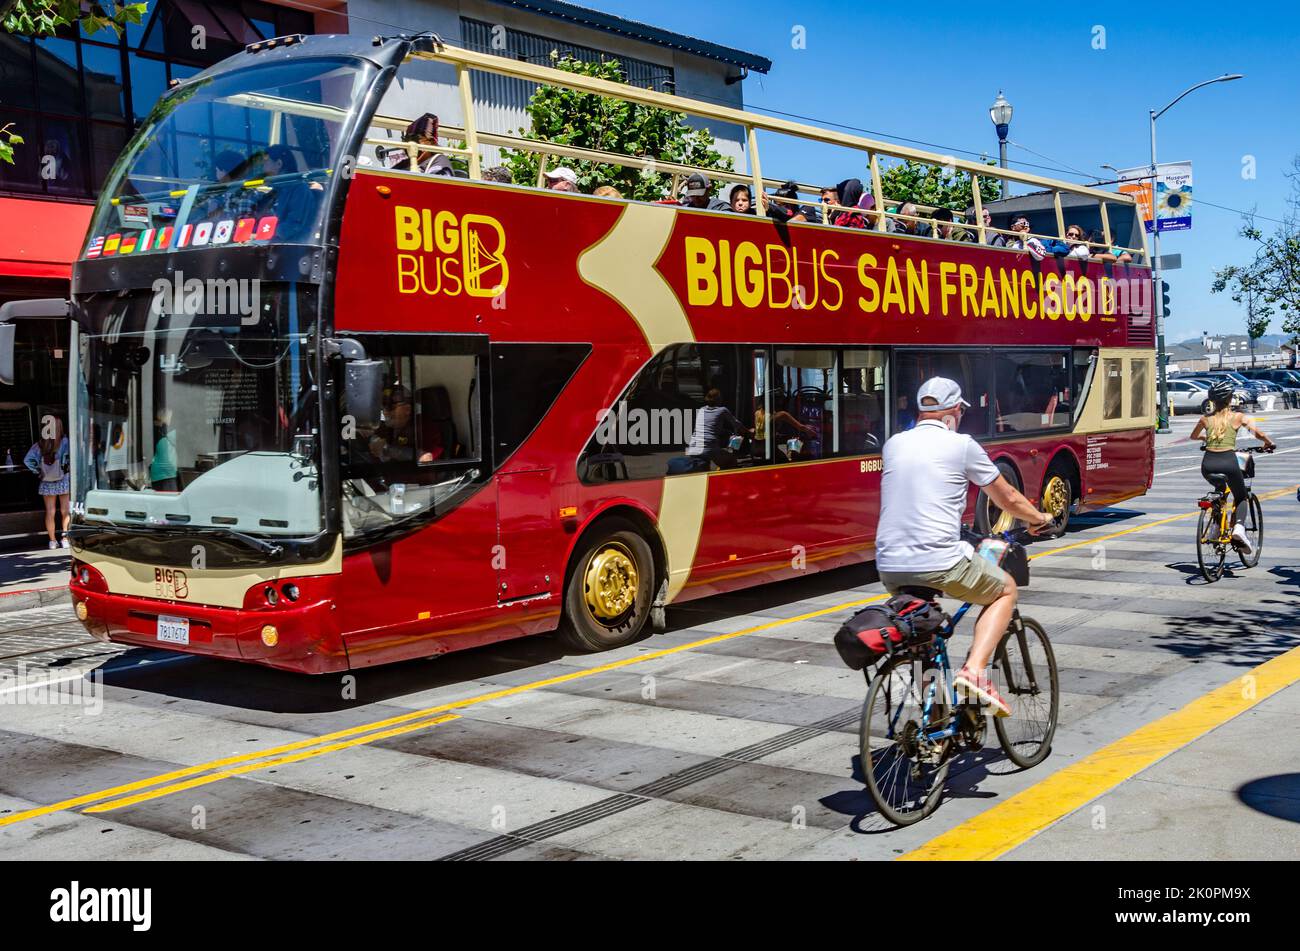 A Big Bus Tours open topped tour bus in San Francisco, California in a summer's day as cyclists cycle past Stock Photo